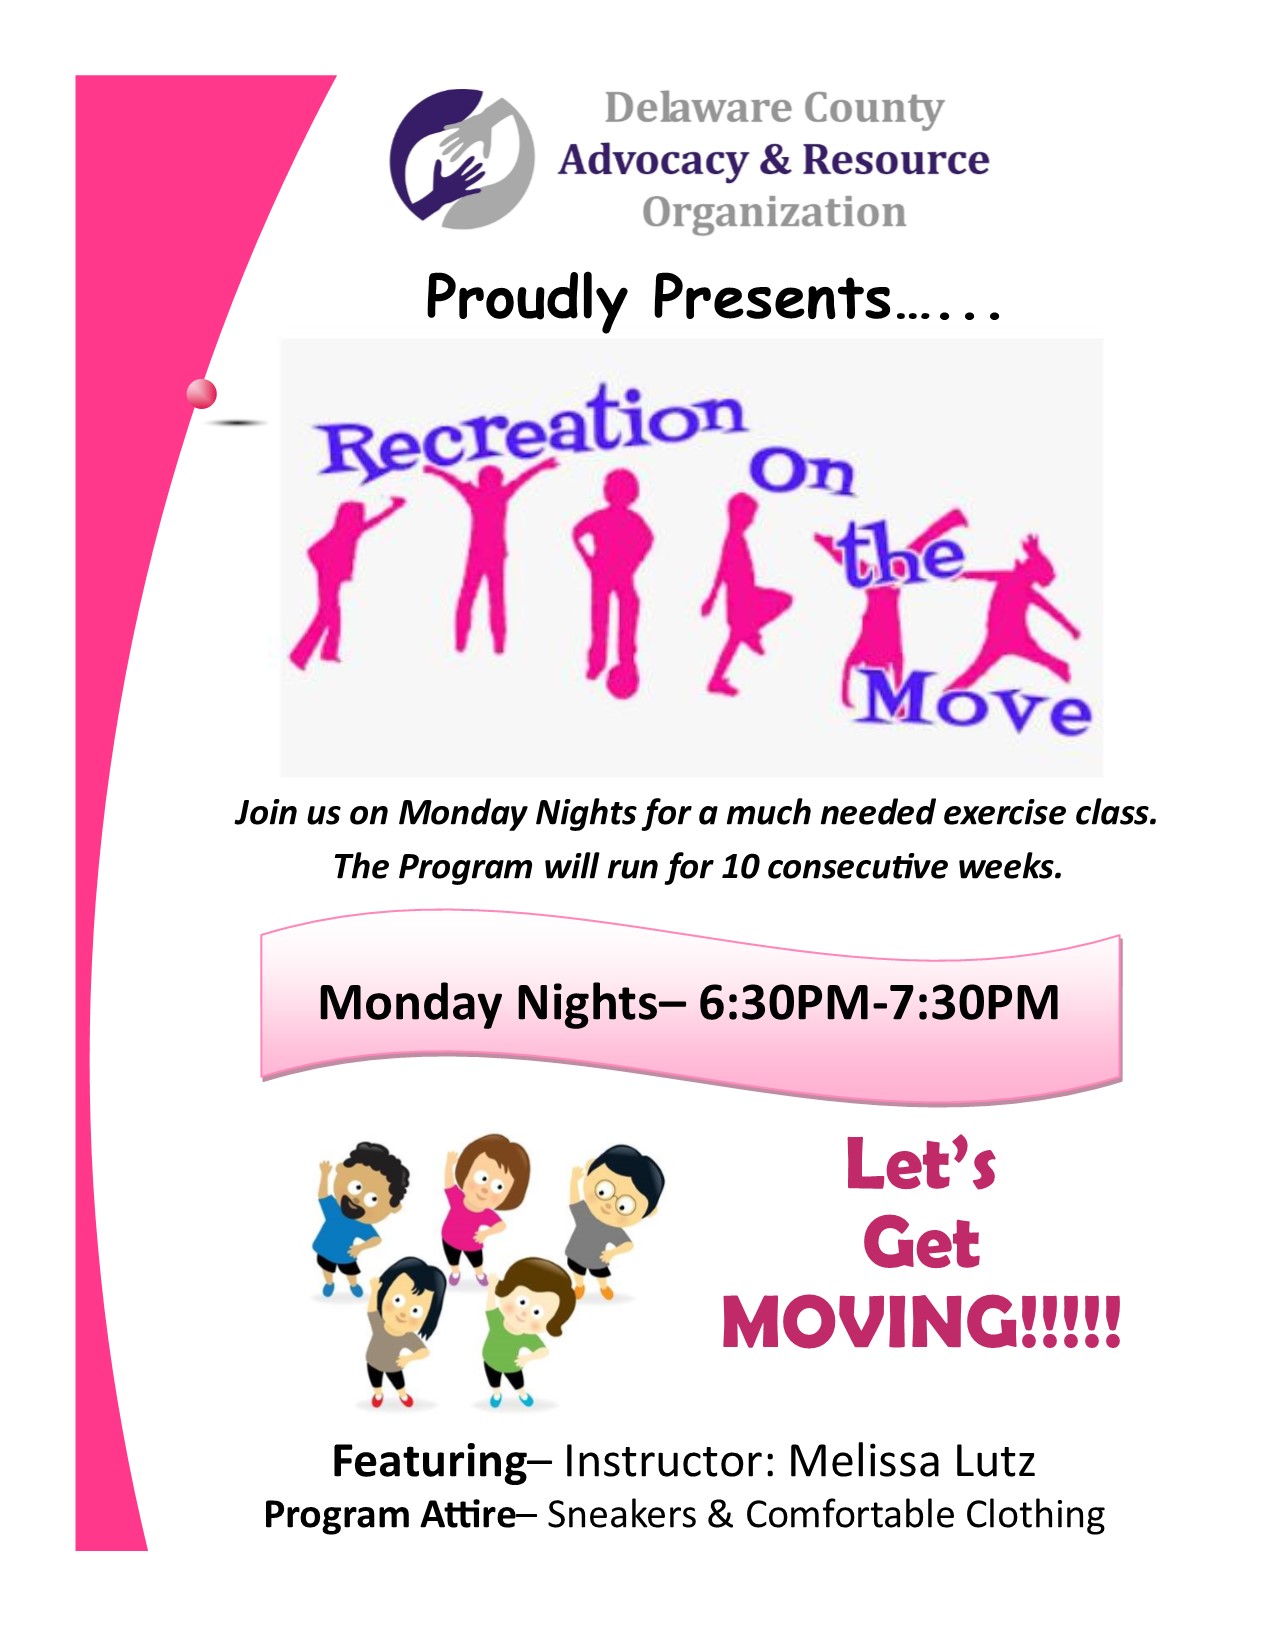 Exercise Flyer - Monday Nights